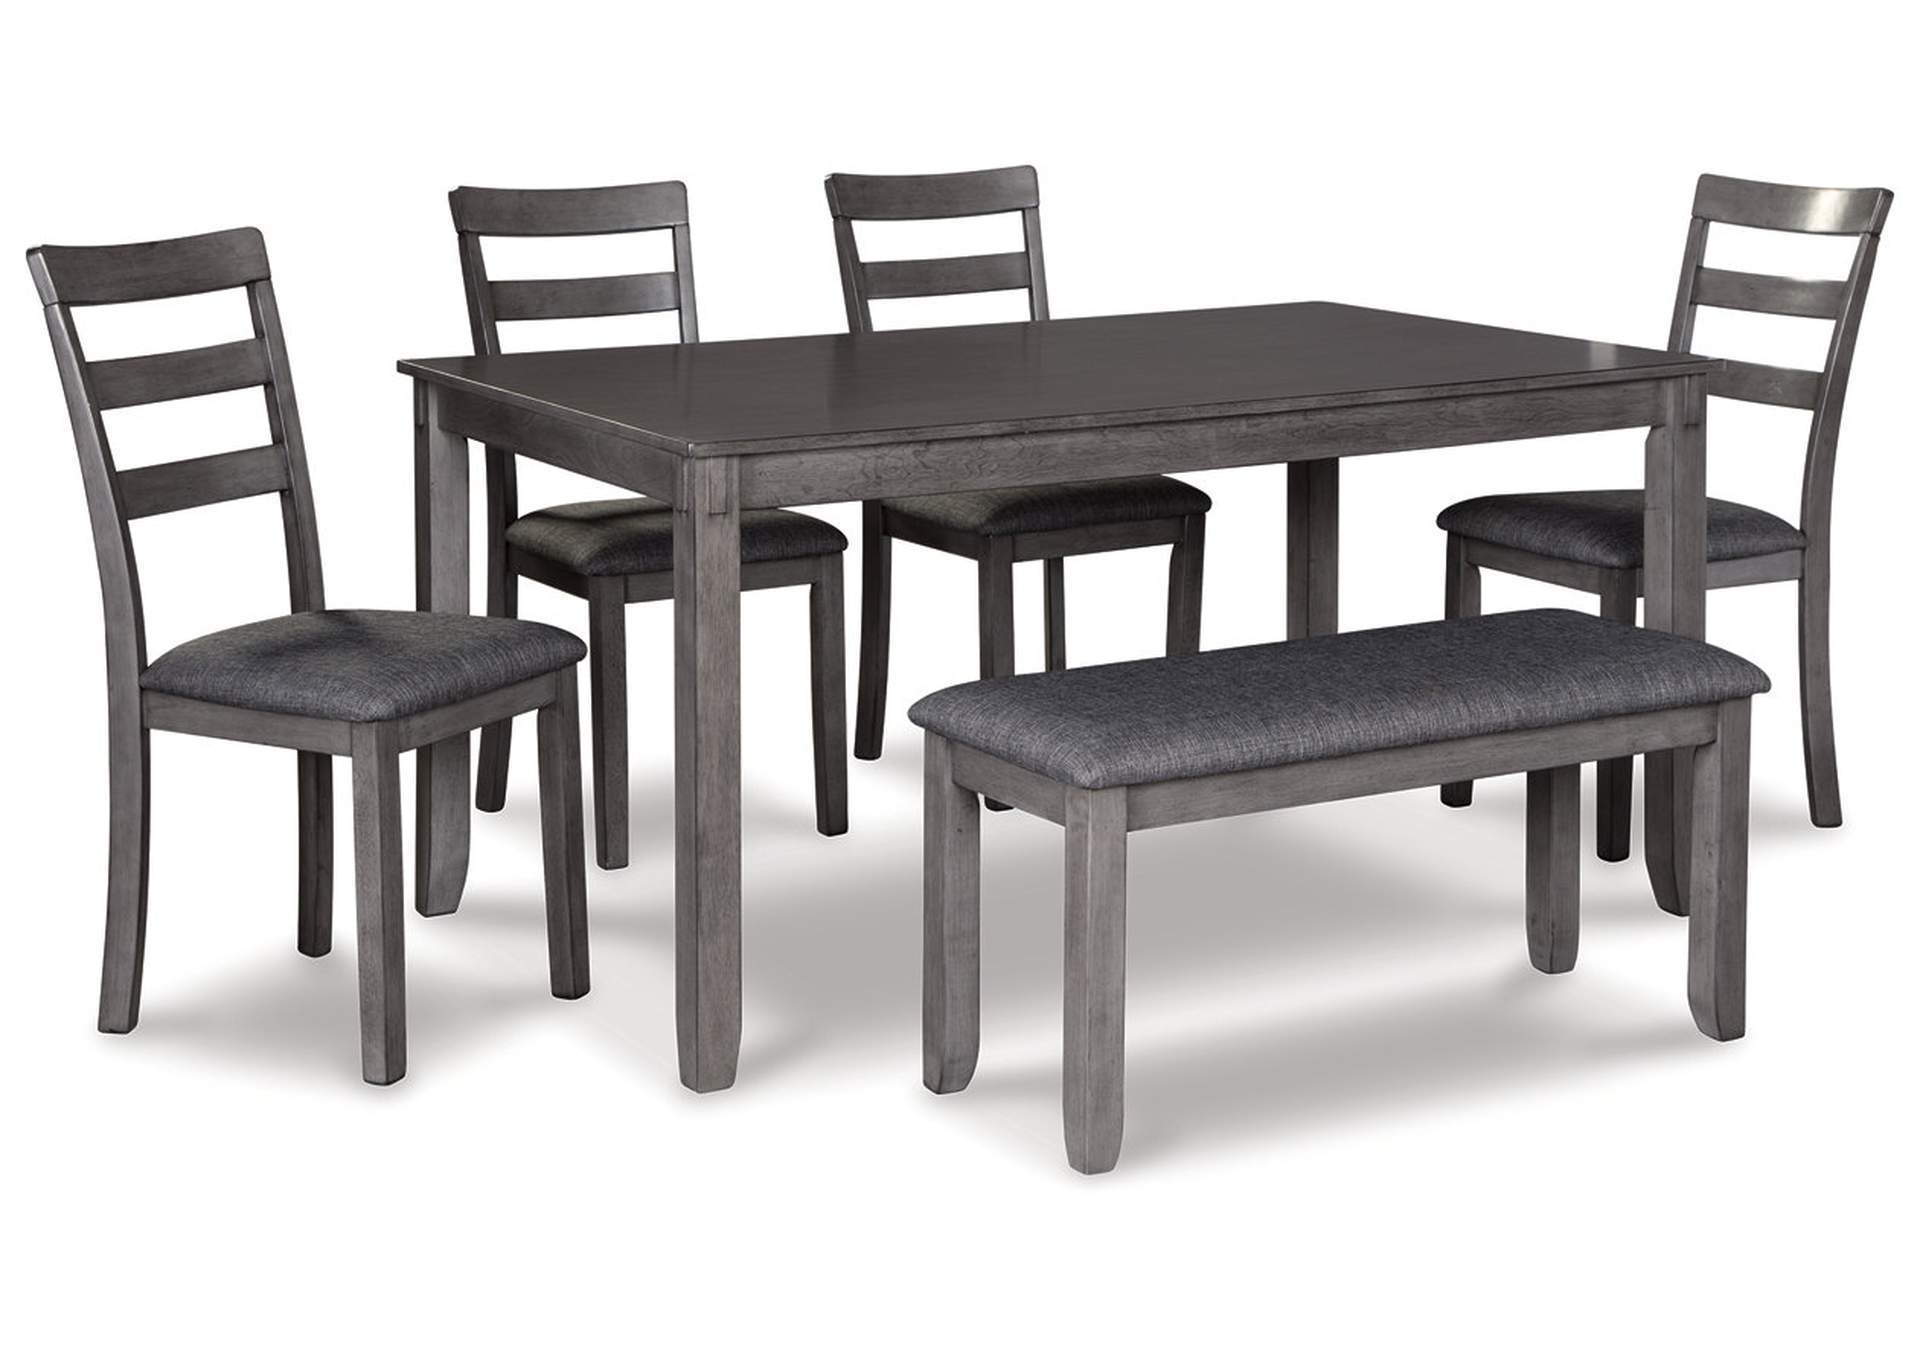 Bridson Dining Room Table And Chairs, Bridson Dining Room Table And Chairs With Bench Set Of 6